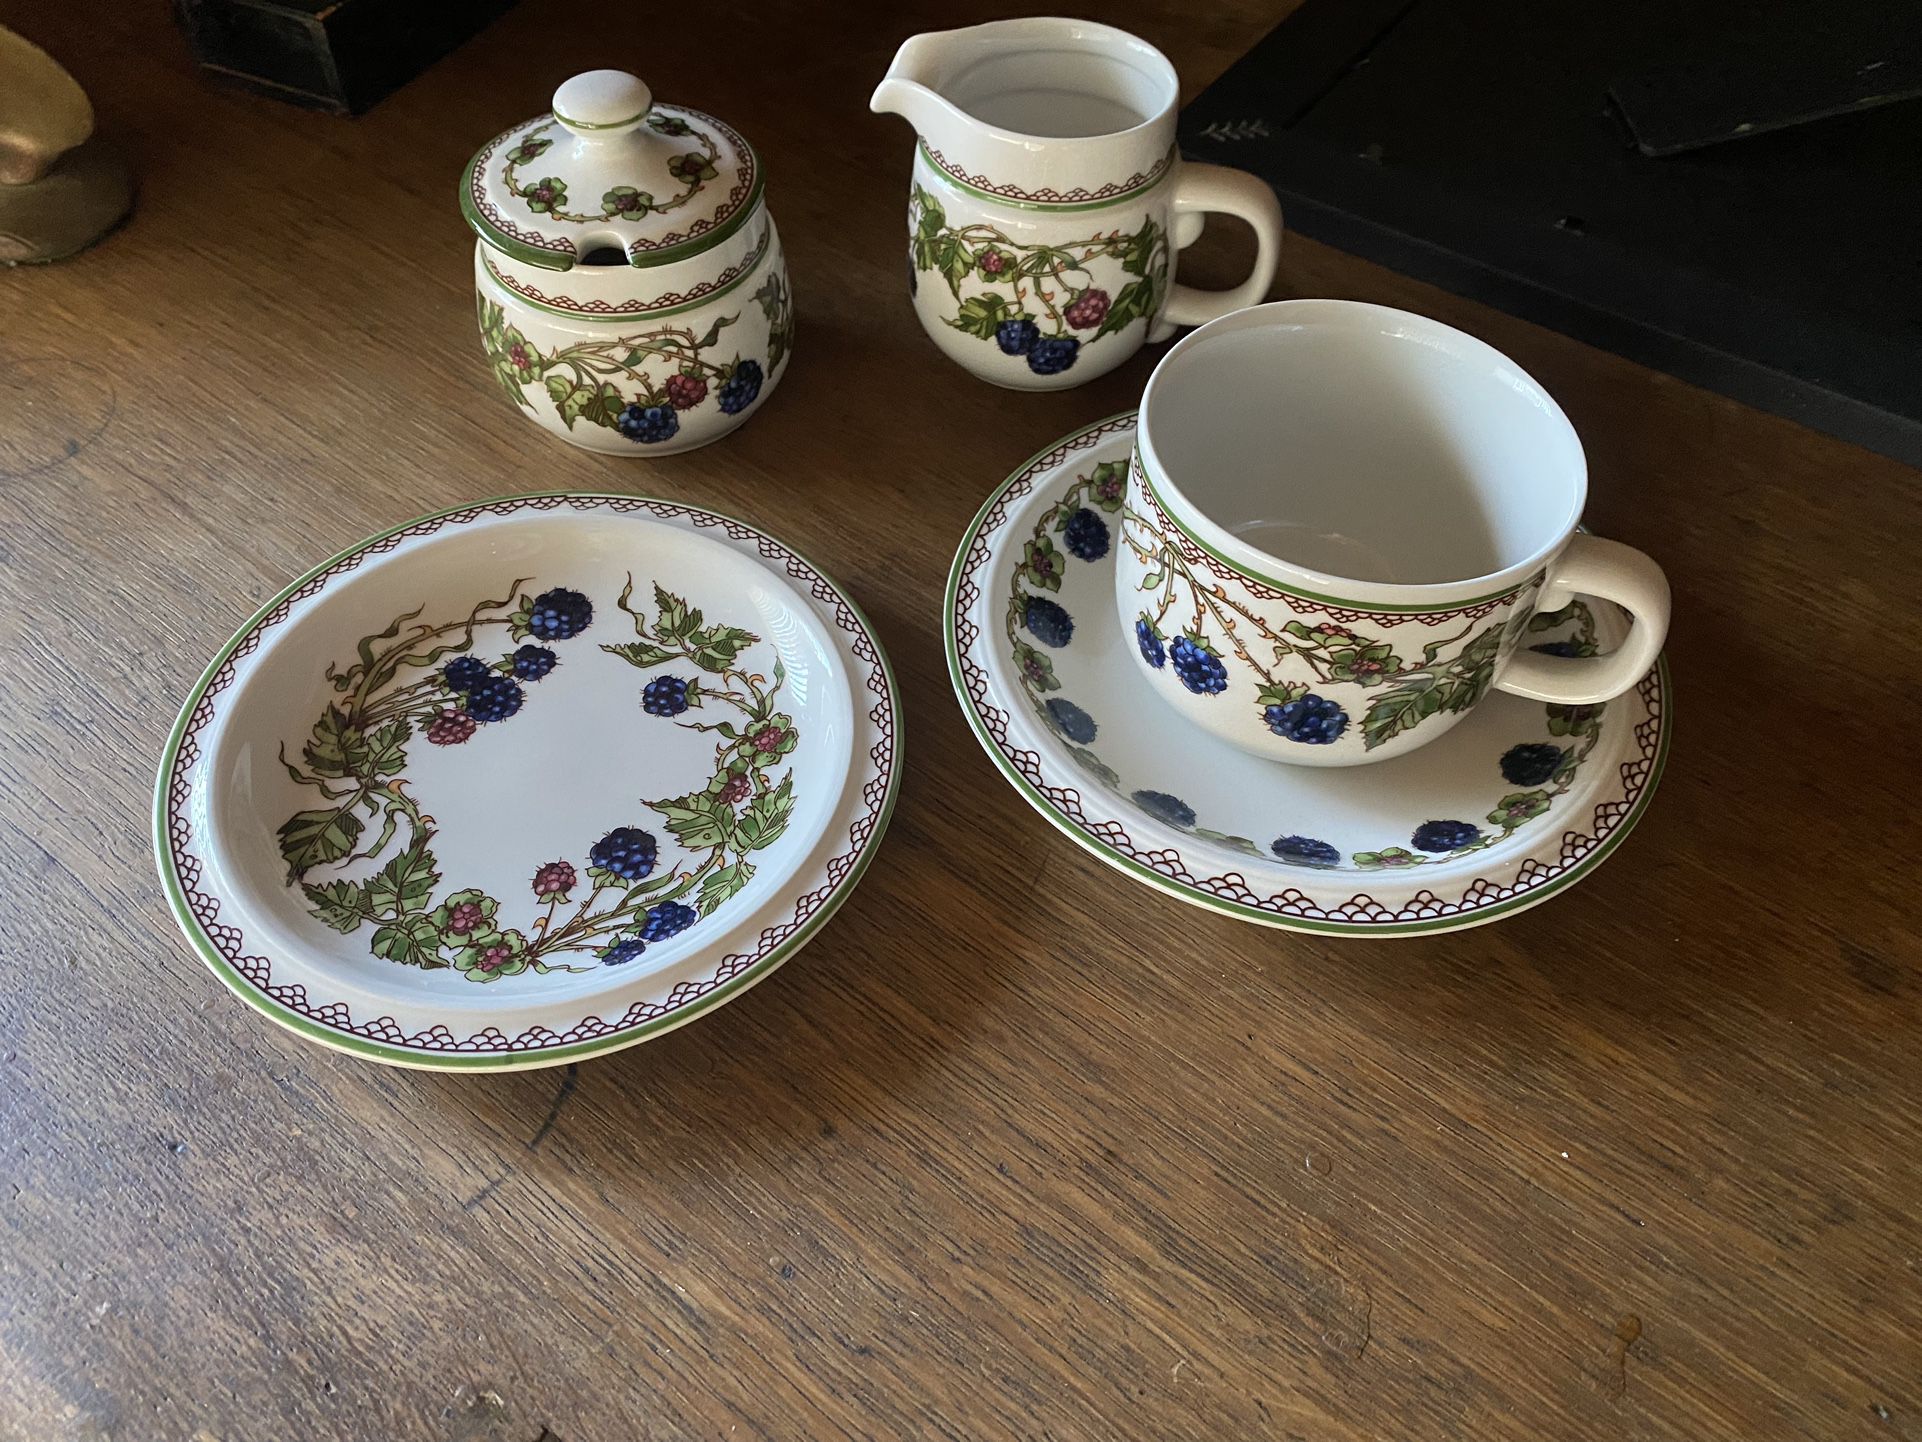 Coffee Set For 4 by Göbel, Manufacturer Oeslauer . Brombeere 